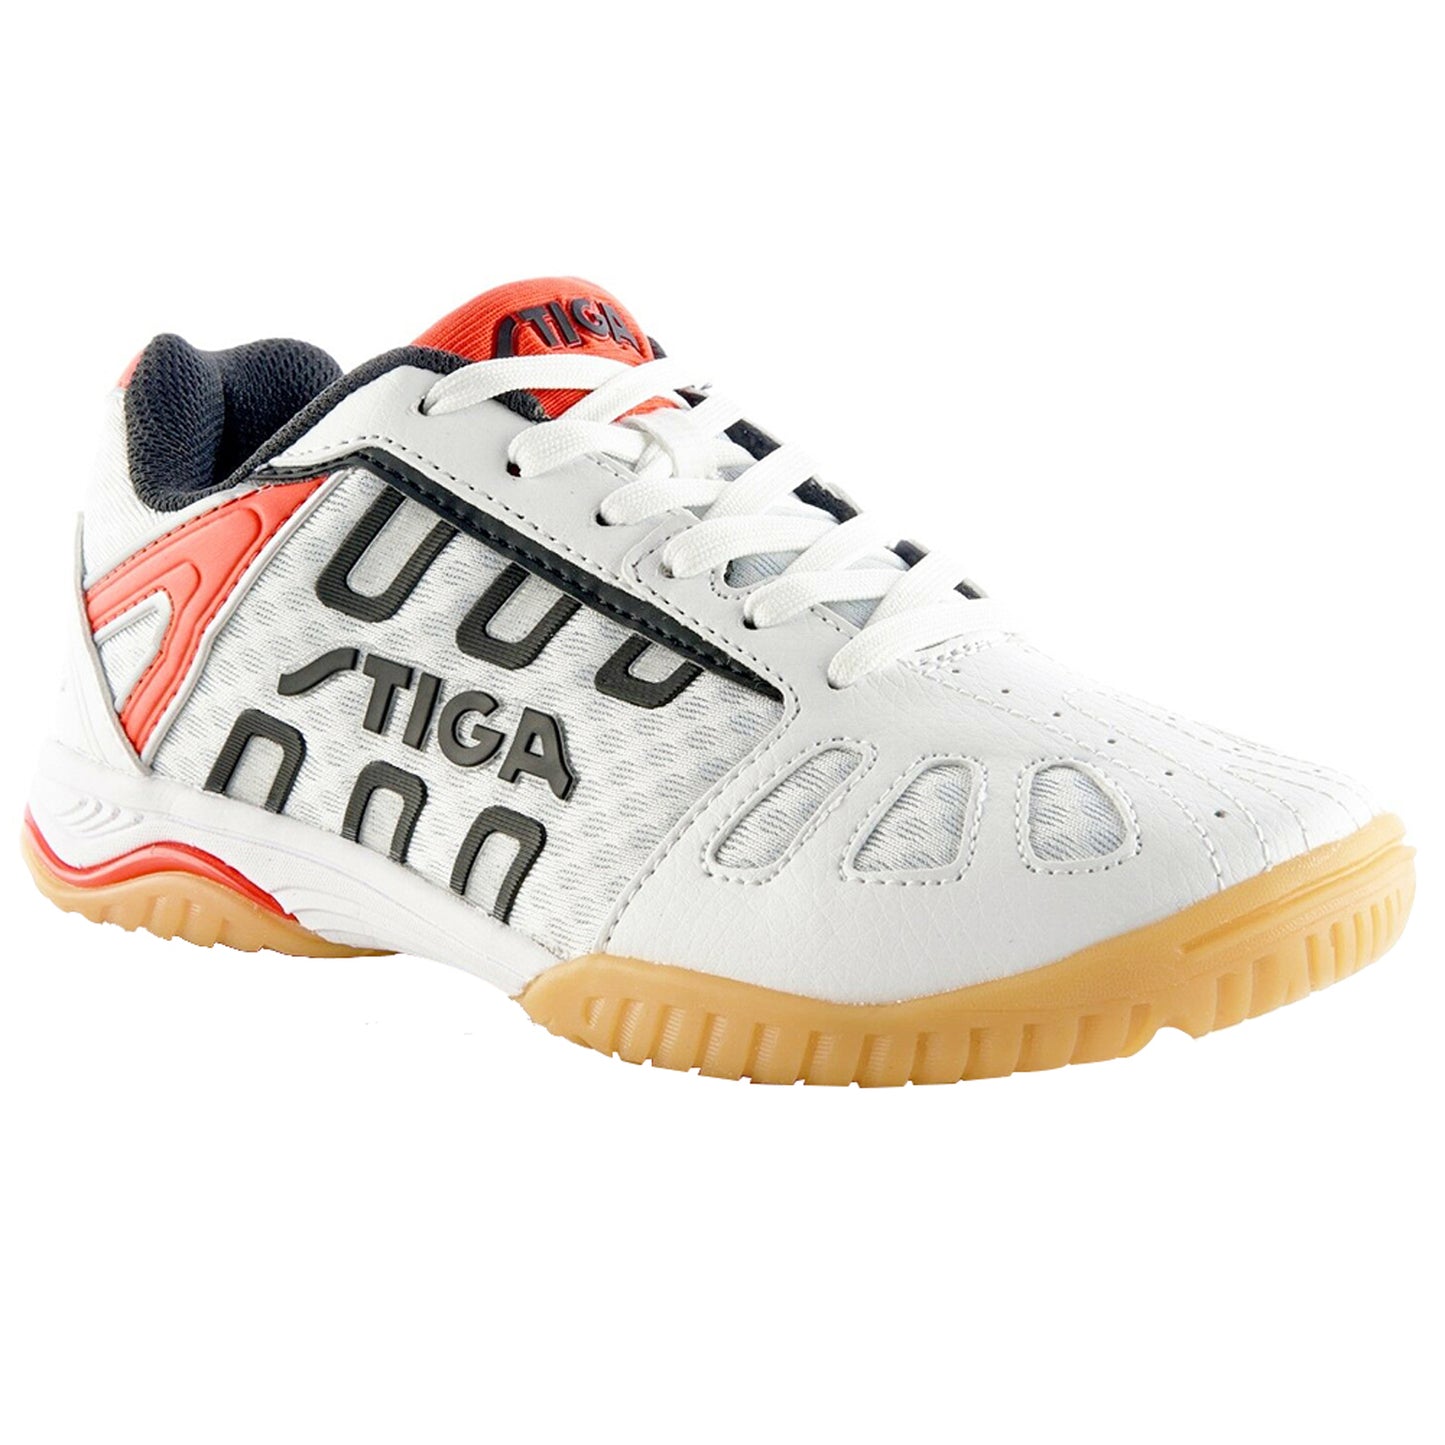 Stiga Liner-II Professional Table Tennis Shoes - White/Red - Best Price online Prokicksports.com